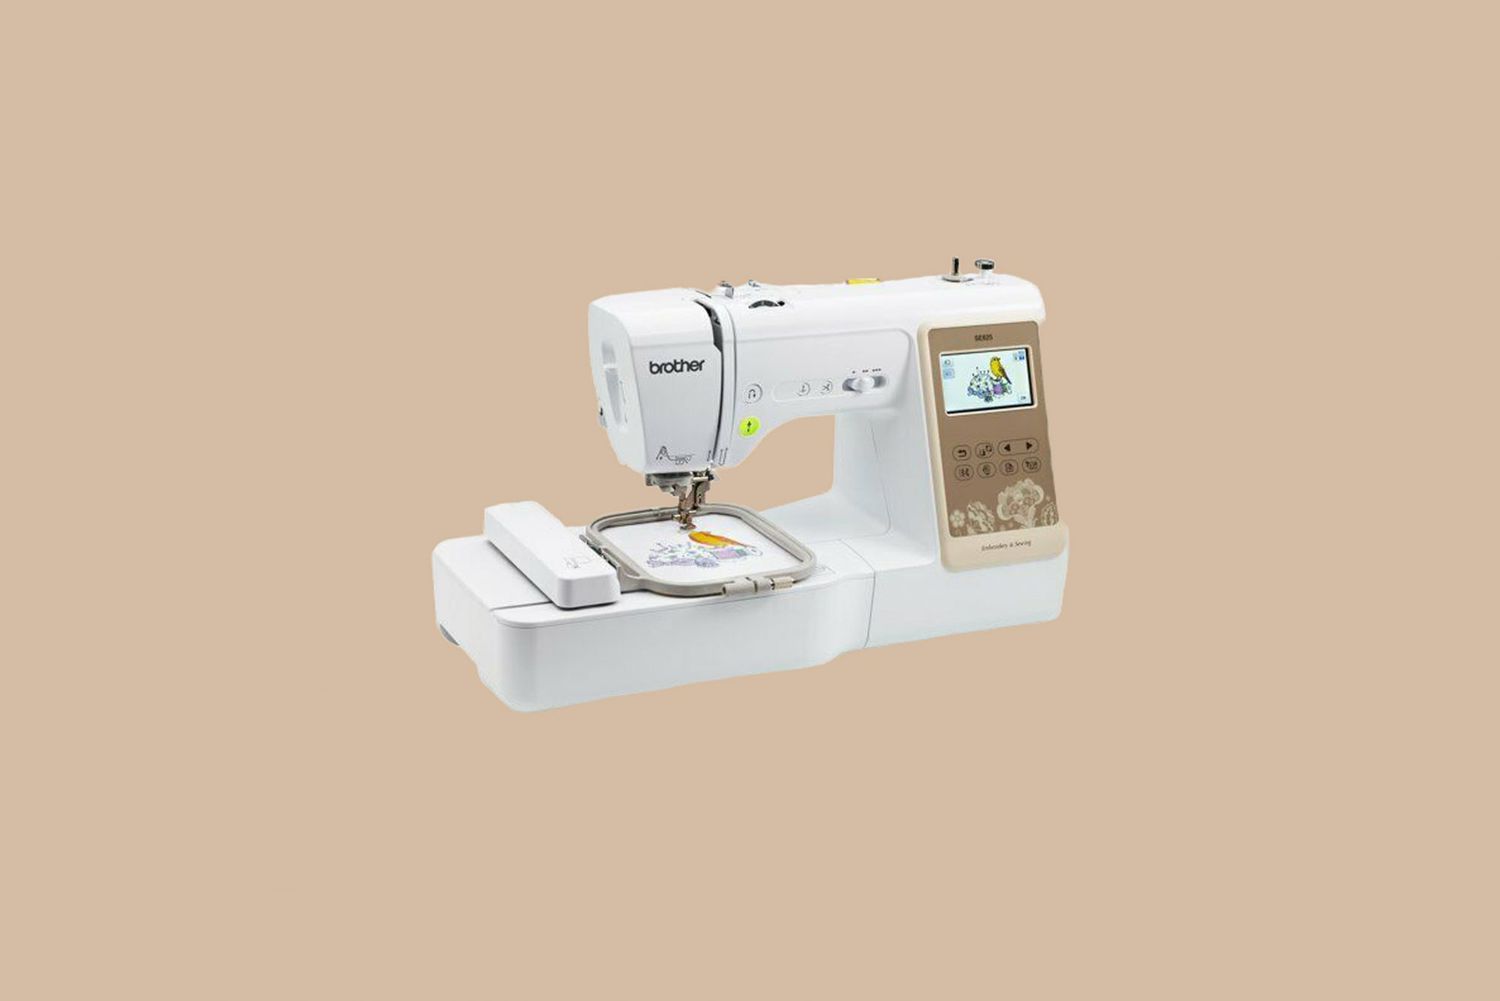 brother SE625 sewing and embroidery machine